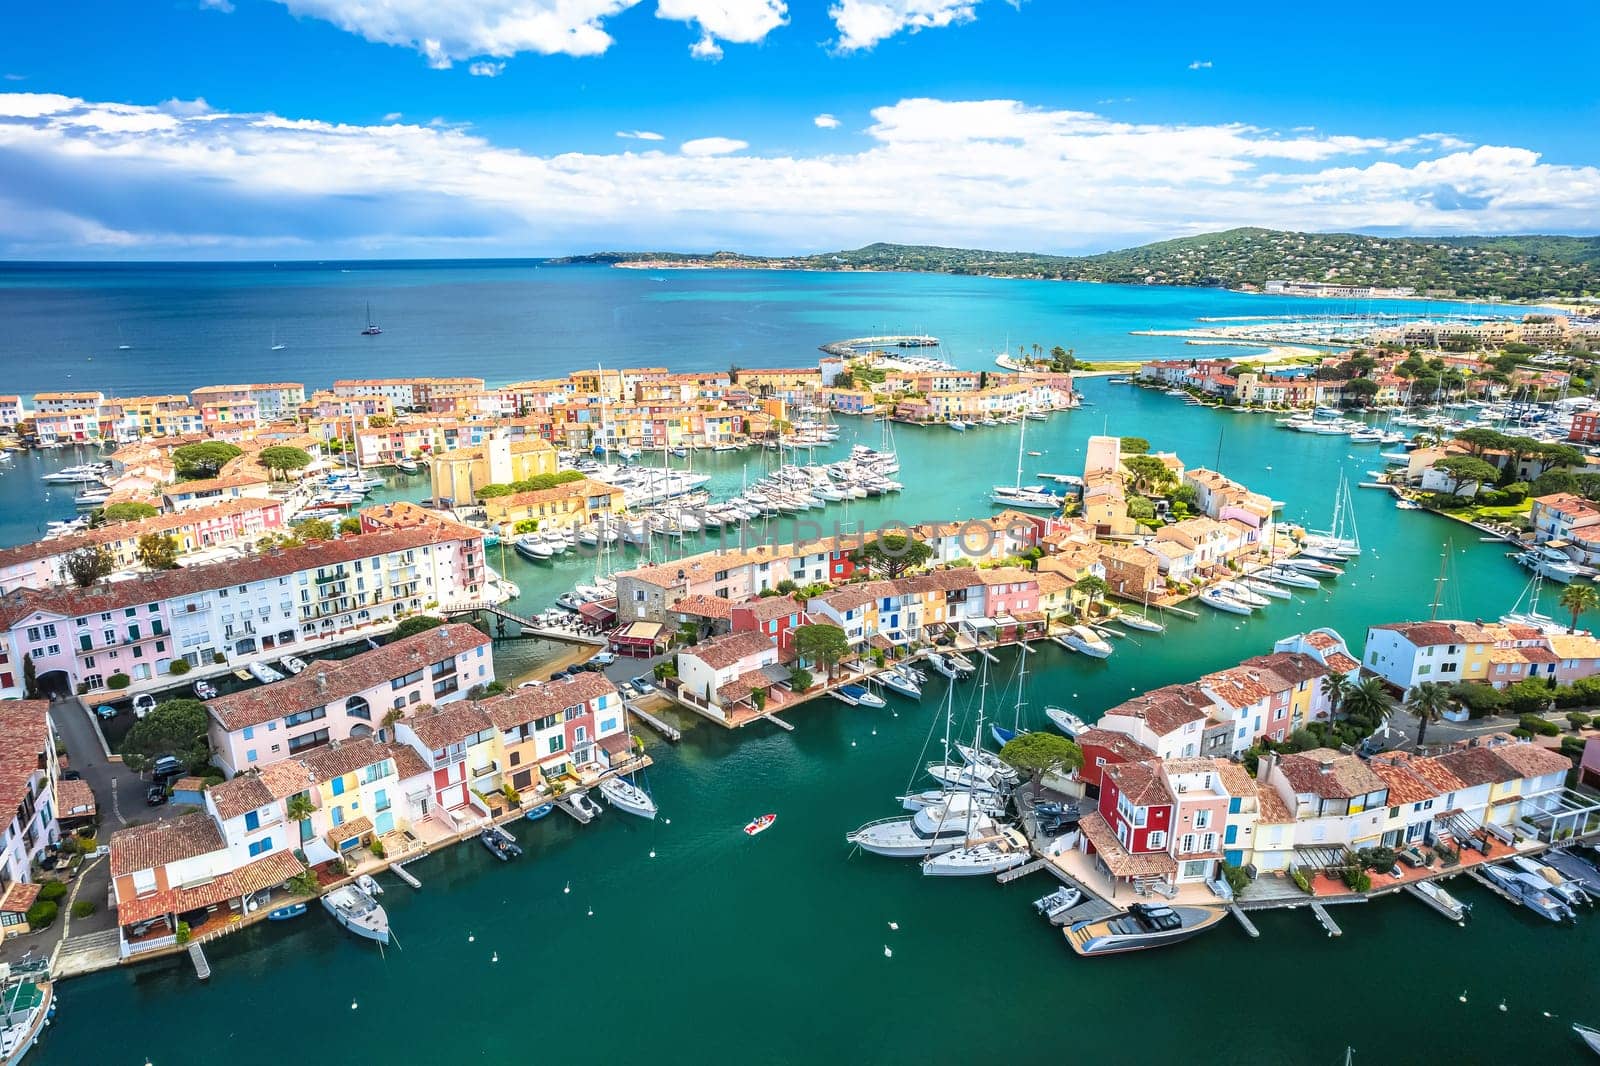 Scenic Port Grimaud yachting village marina aerial view, archipelago of French riviera